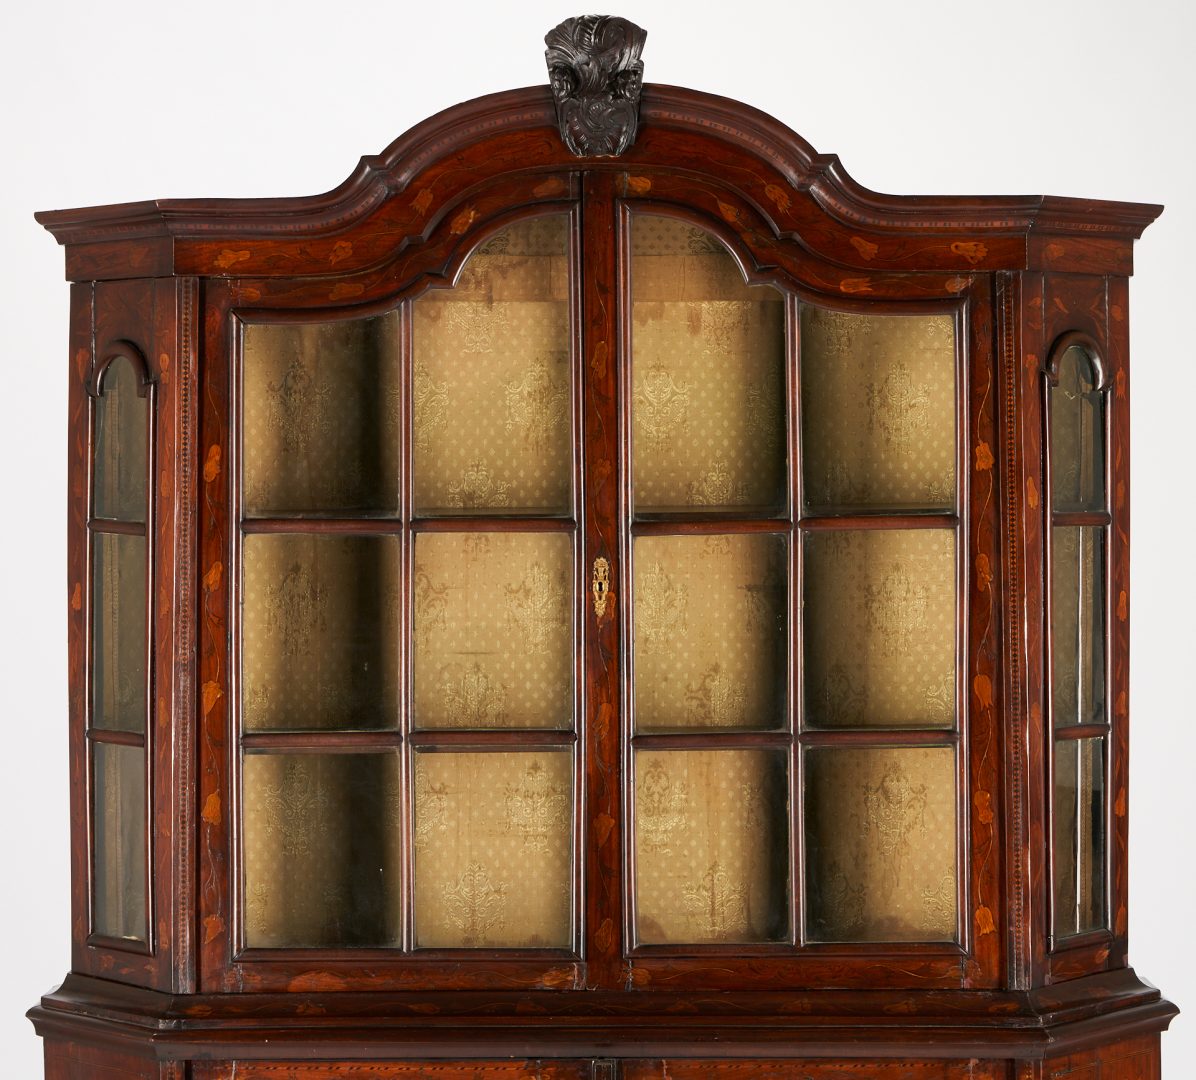 Lot 158: Continental Marquetry Bookcase or Display Cabinet